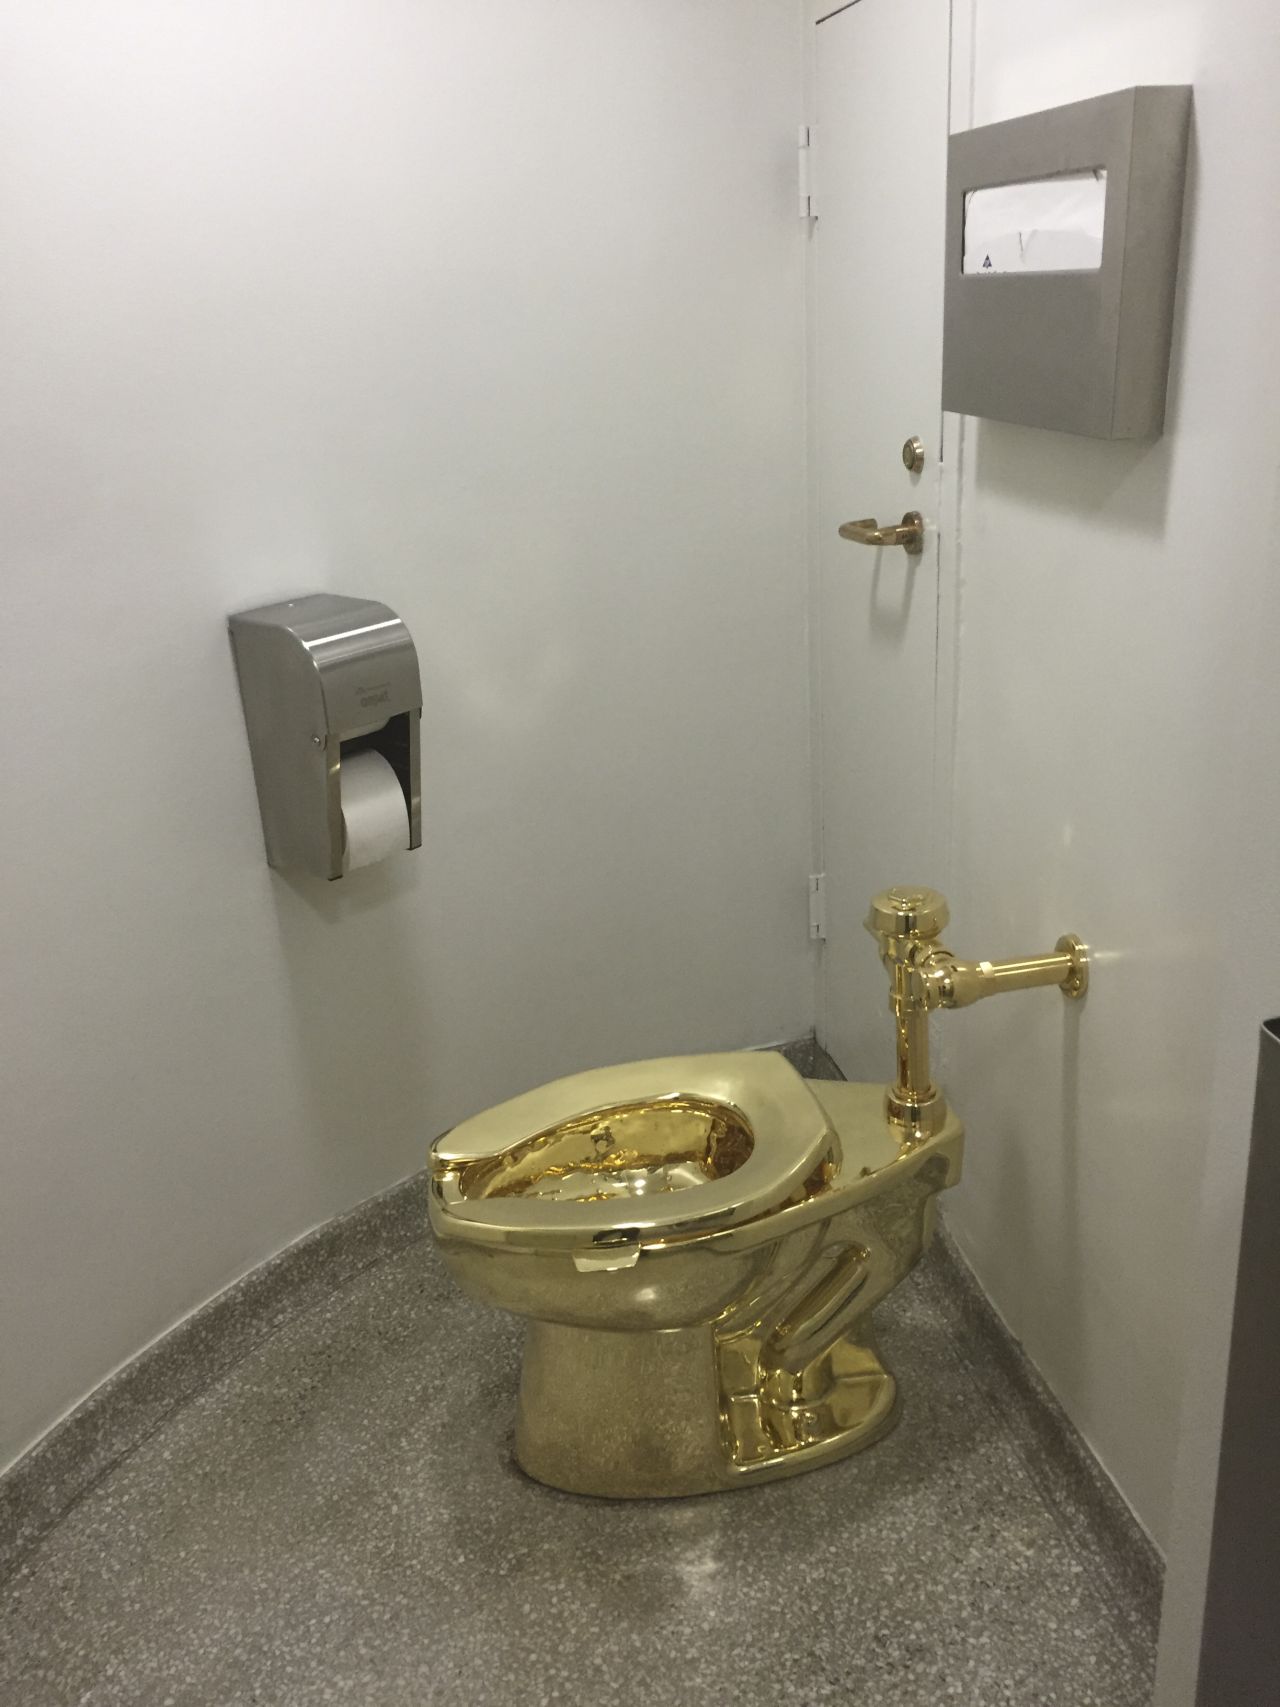 The fully functioning solid gold toilet, made by Italian artist Maurizio Cattelan, was stolen on September 14.        